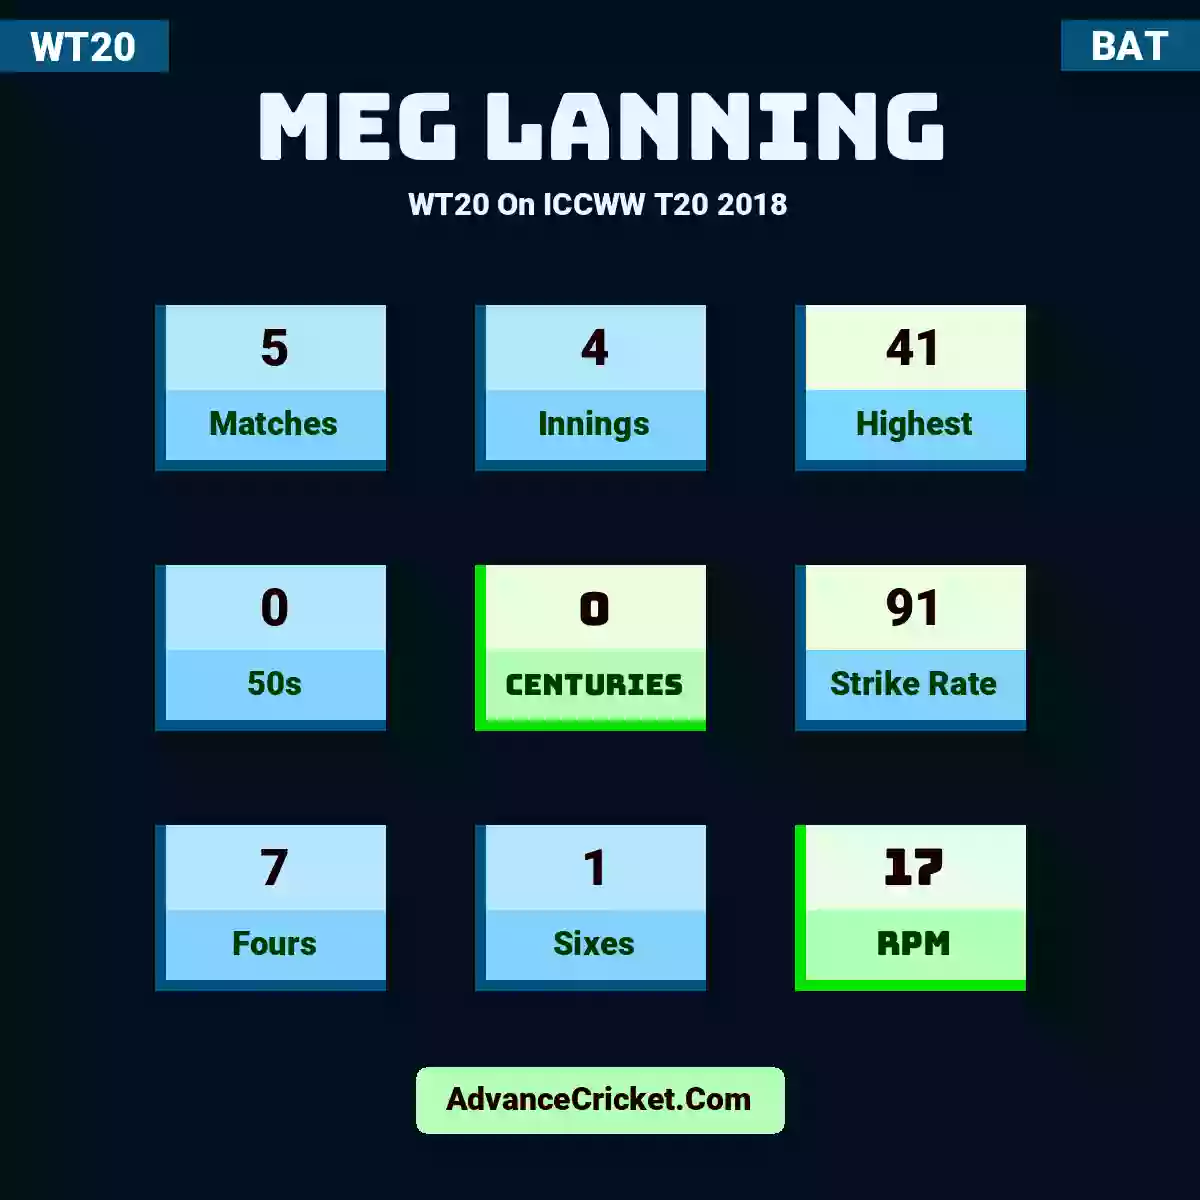 Meg Lanning WT20  On ICCWW T20 2018, Meg Lanning played 5 matches, scored 41 runs as highest, 0 half-centuries, and 0 centuries, with a strike rate of 91. M.Lanning hit 7 fours and 1 sixes, with an RPM of 17.